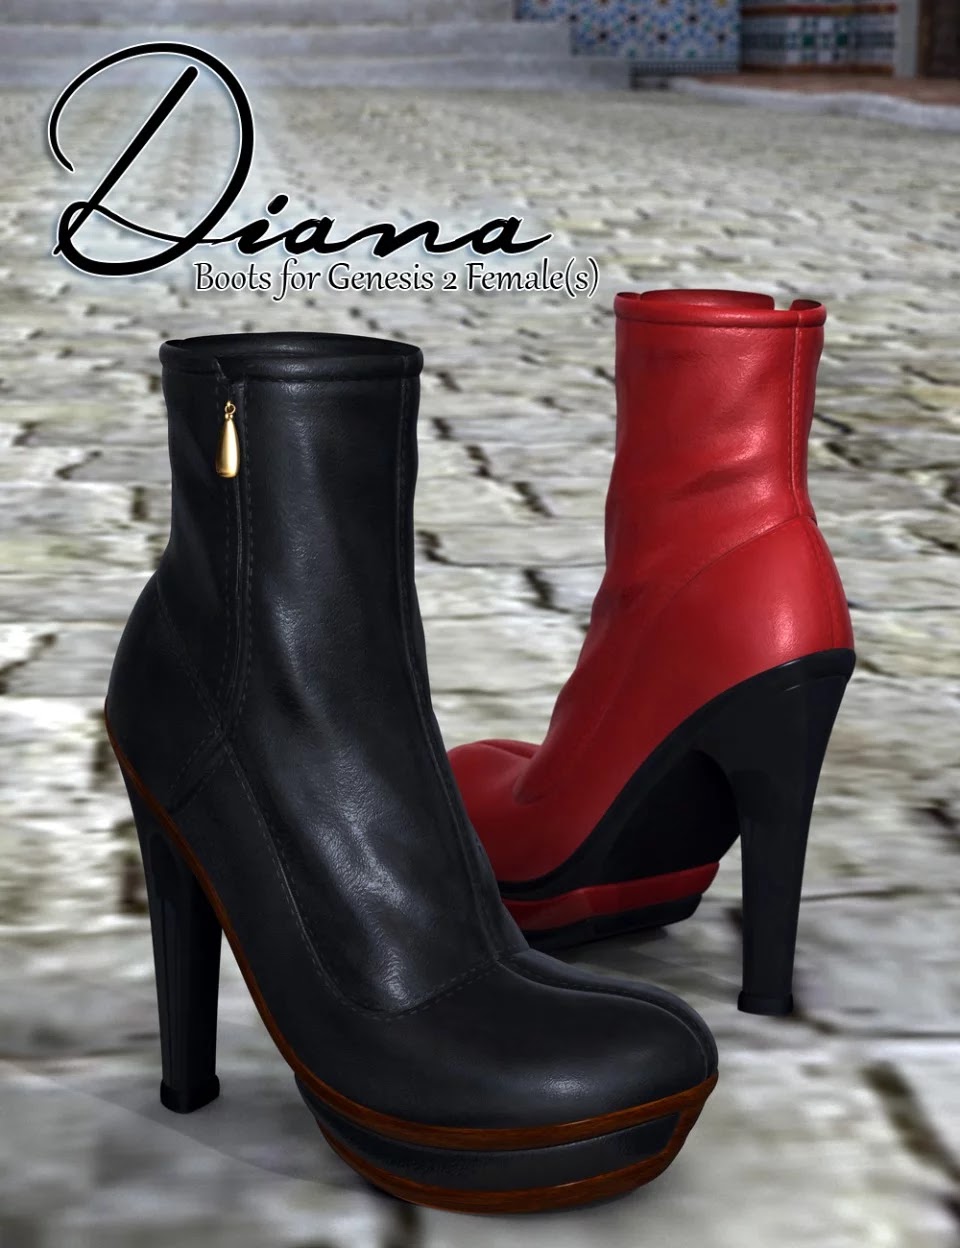 Diana Boots for Genesis 2 Female(s)_DAZ3D下载站